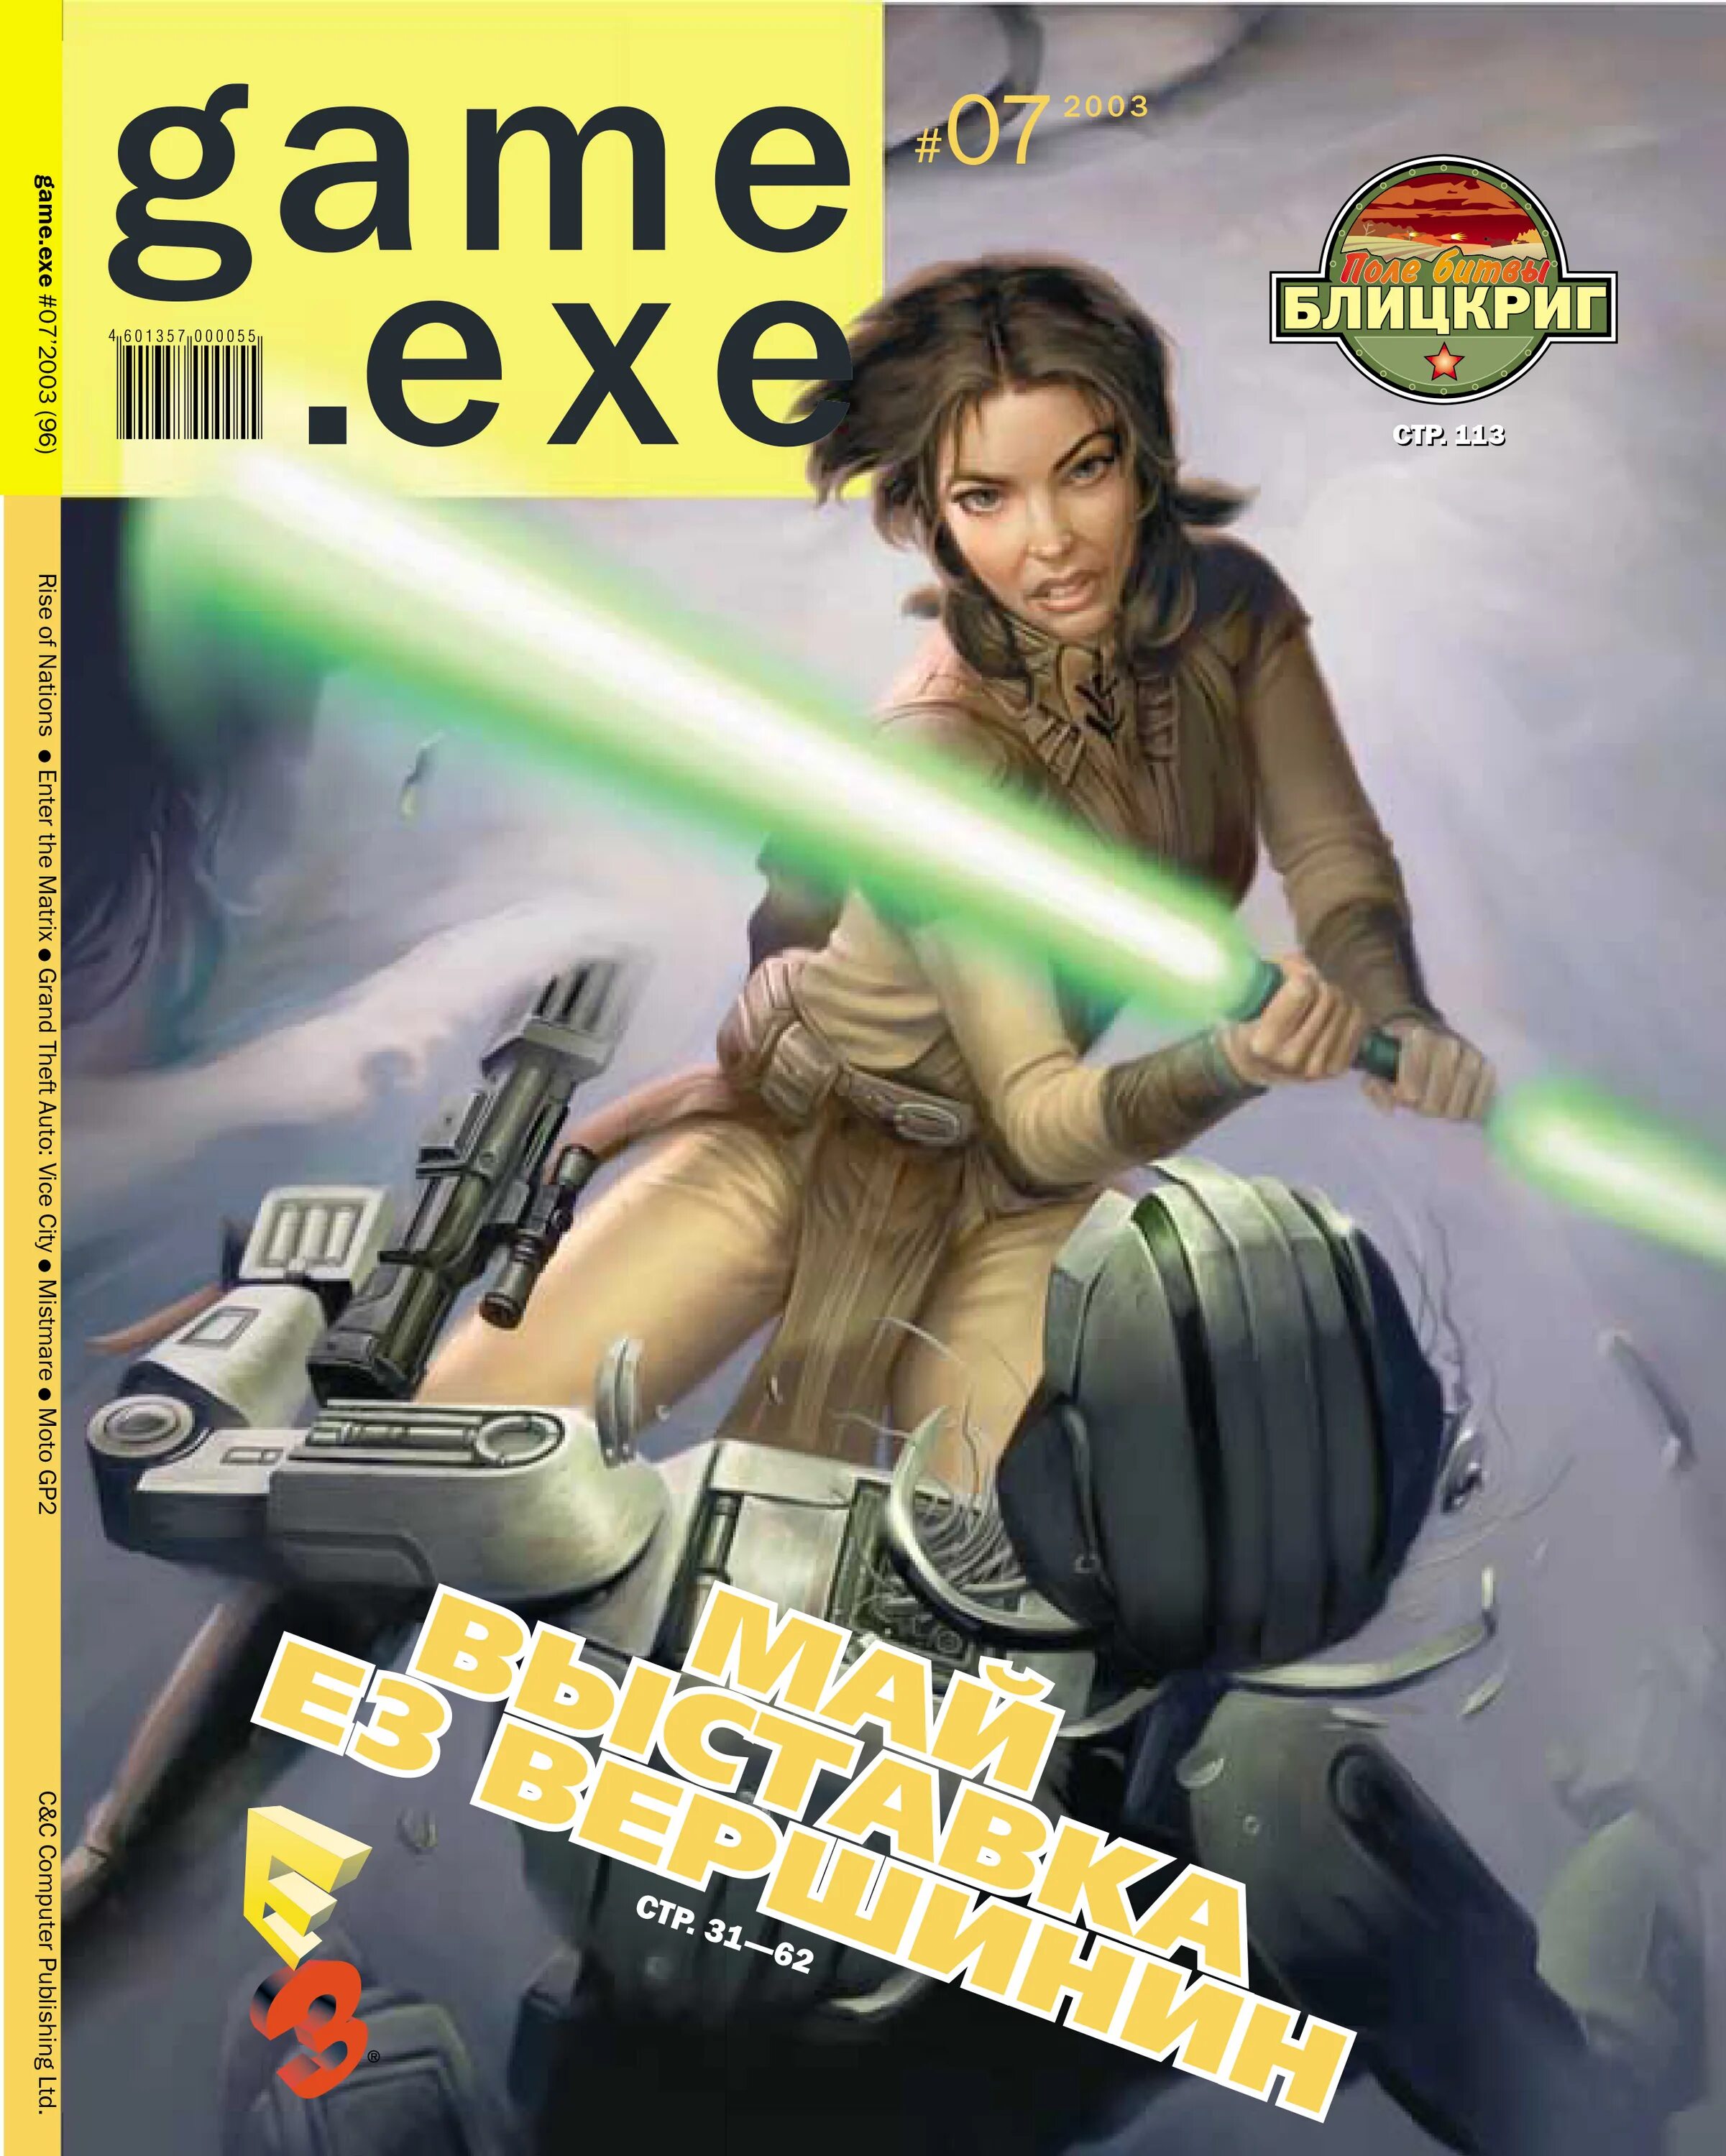 Game exe журнал. Game exe журнал 2003 2003 2003. Game exe журнал 2003. Журнал гейм ехе. Download game exe